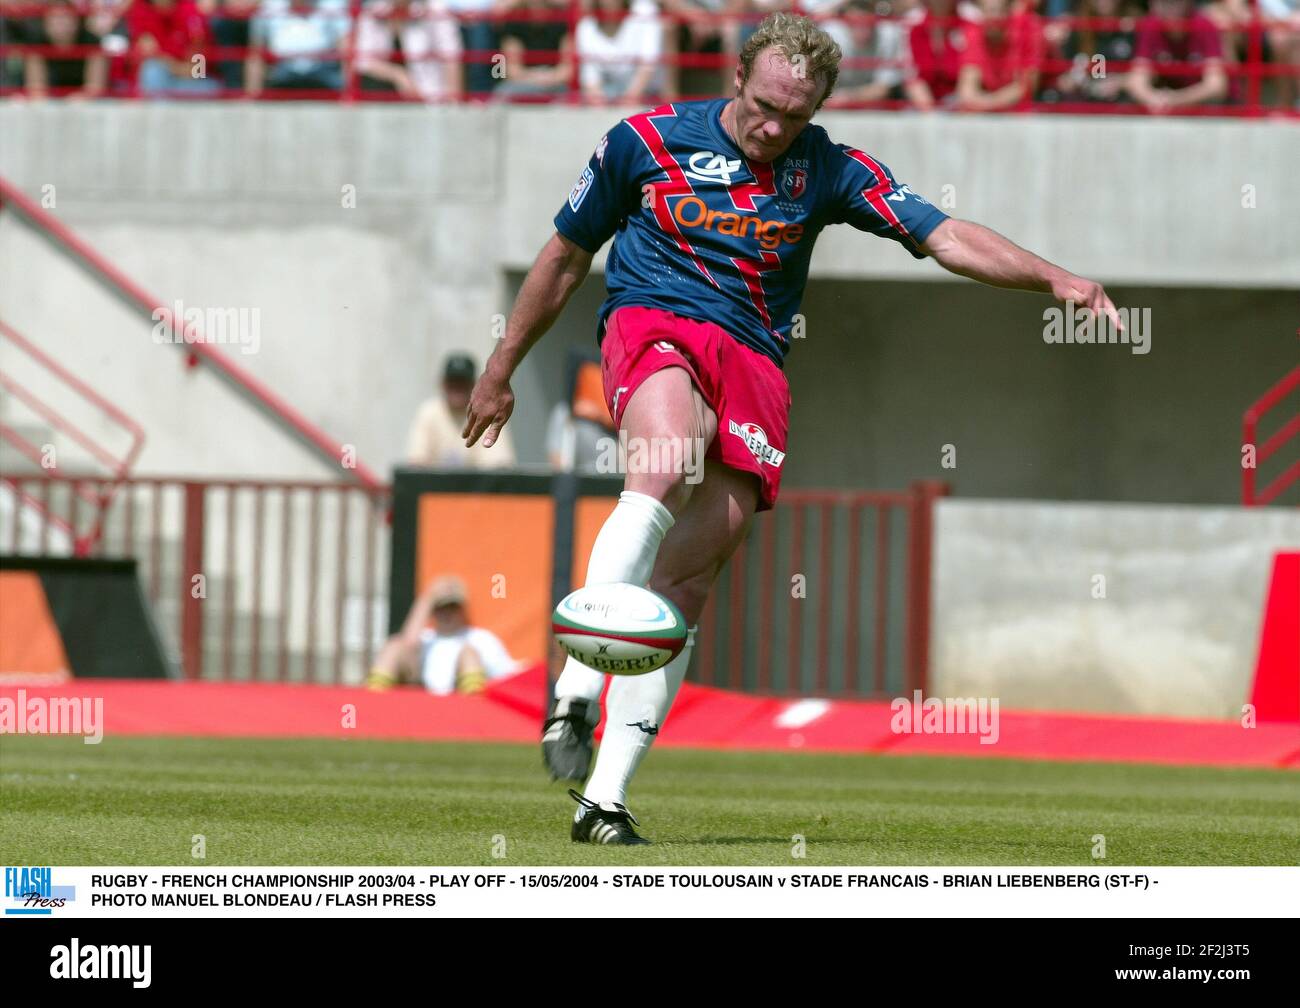 RUGBY - FRENCH CHAMPIONSHIP 2003/04 - PLAY OFF - 15/05/2004 - STADE TOULOUSAIN v STADE FRANCAIS - BRIAN LIEBENBERG (ST-F) - PHOTO MANUEL BLONDEAU / FLASH PRESS Stock Photo